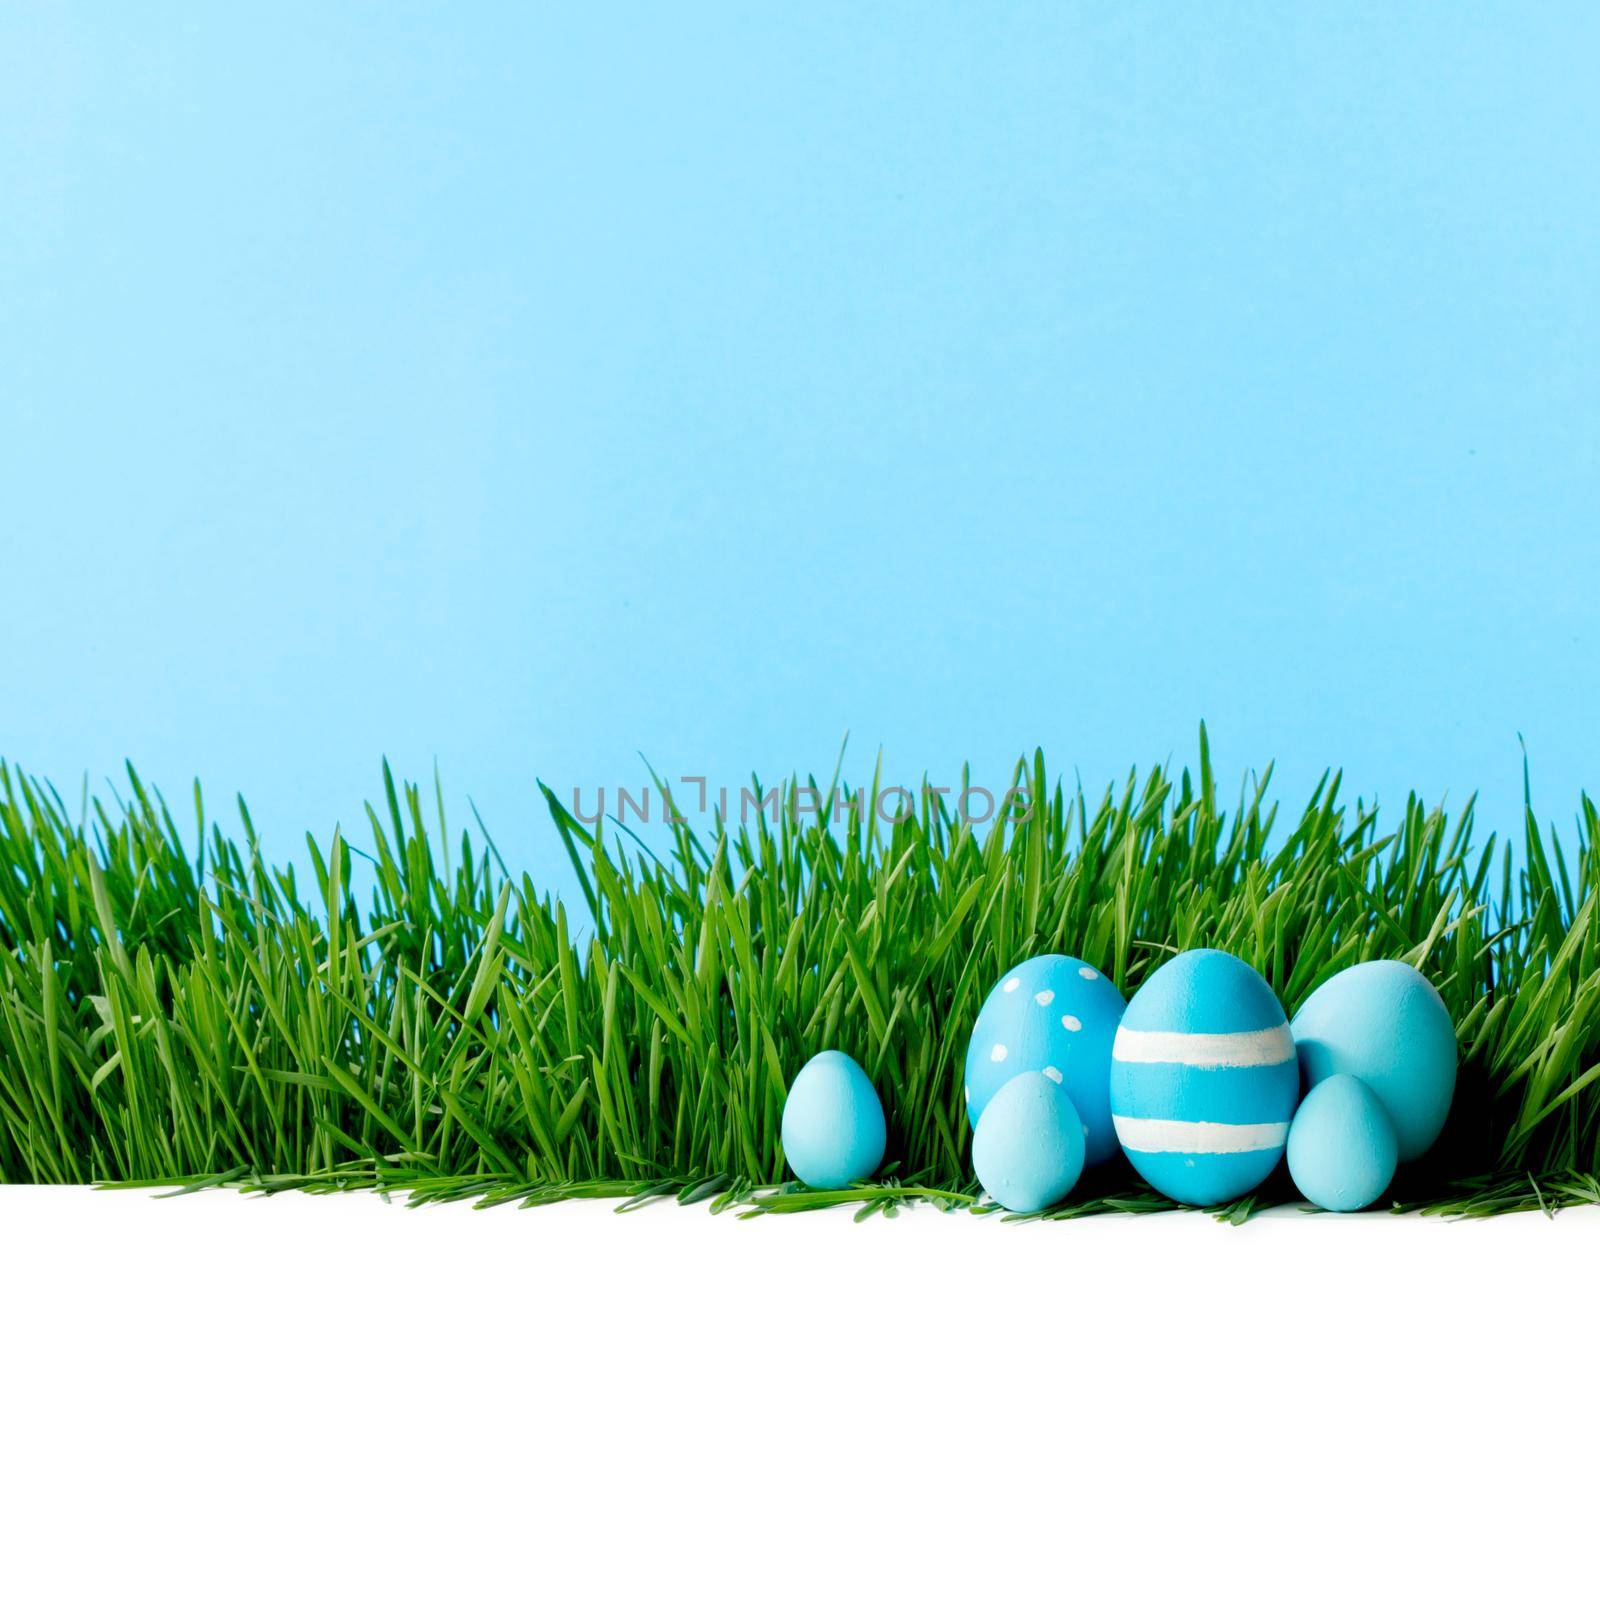 Row of Easter Eggs in grass by Yellowj